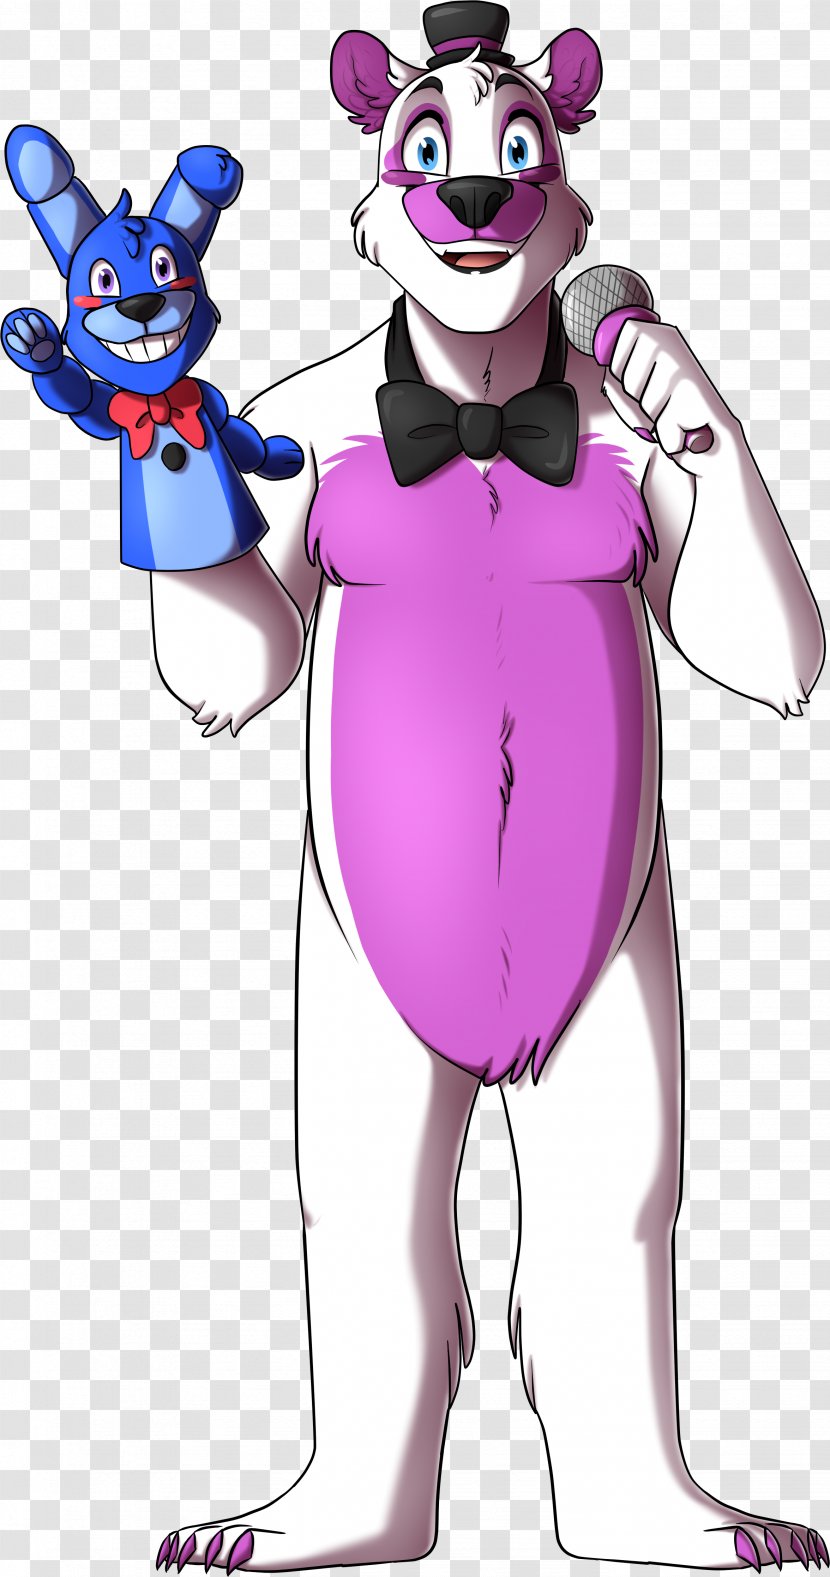 Five Nights At Freddy's: Sister Location Animatronics DeviantArt - Tree - Cute Circus Transparent PNG